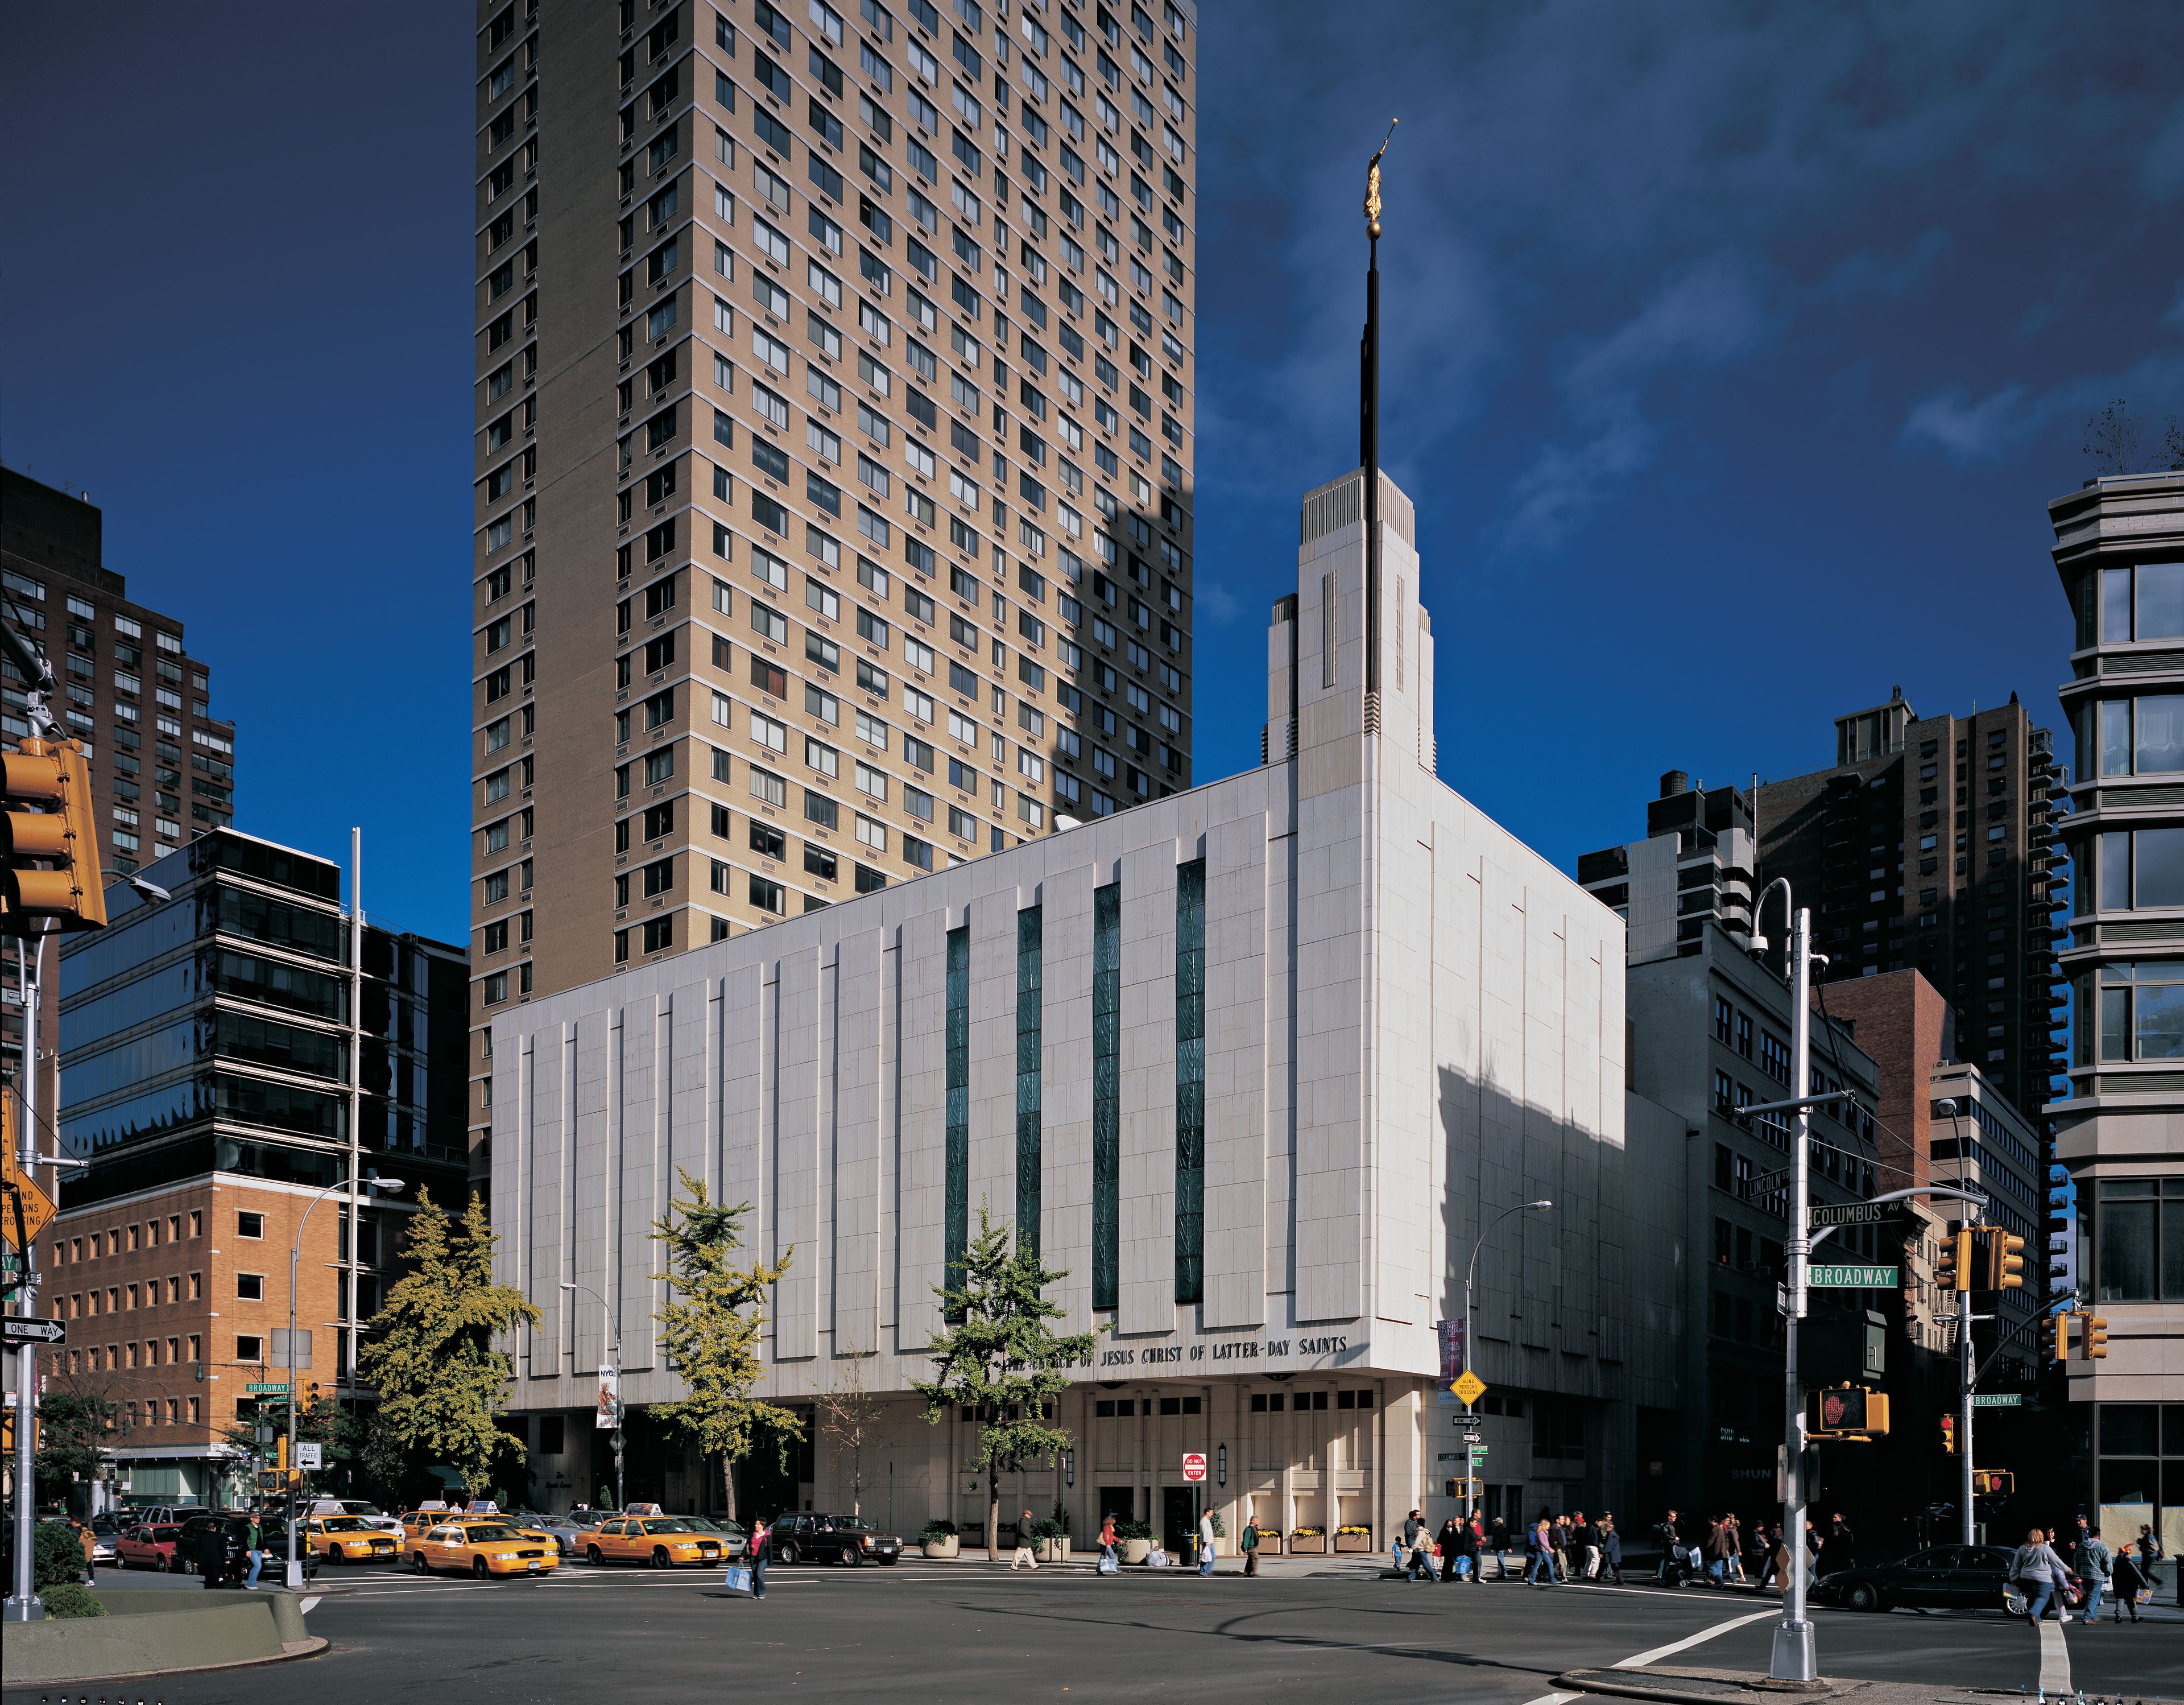 The Manhattan New York Temple against a dark sky, including the entrance and scenery.